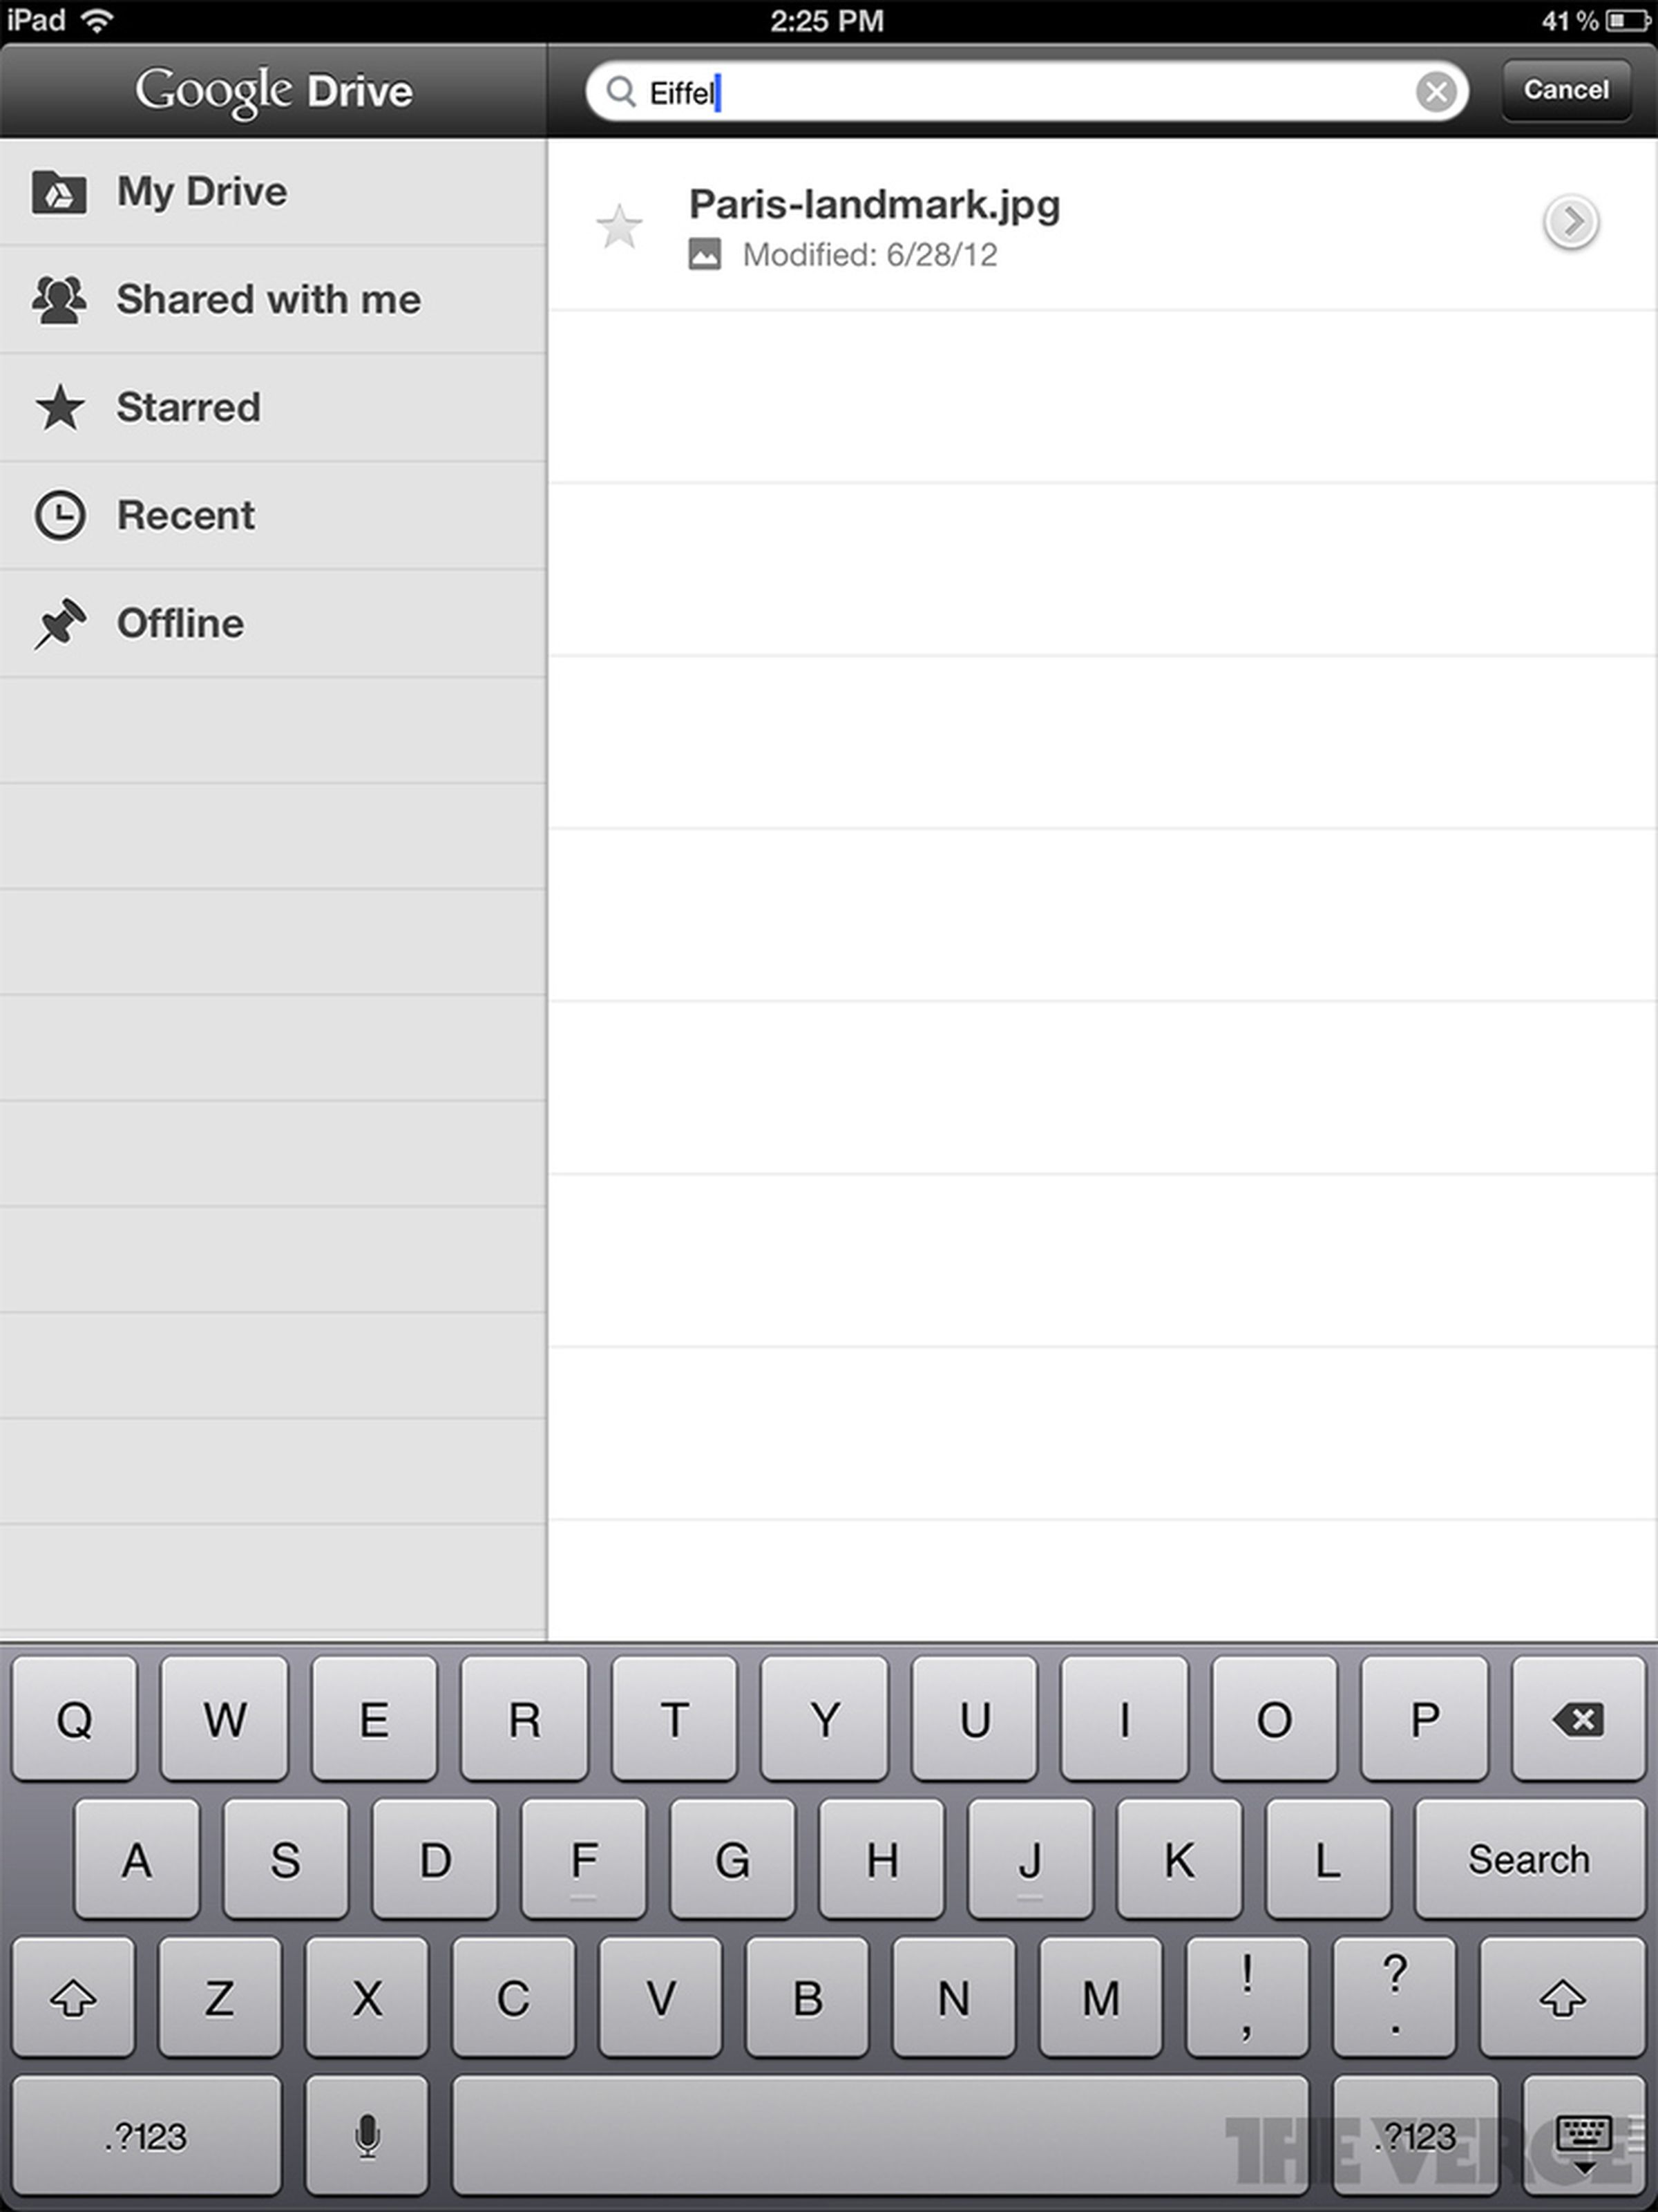 Google Drive for iPad hands-on pictures